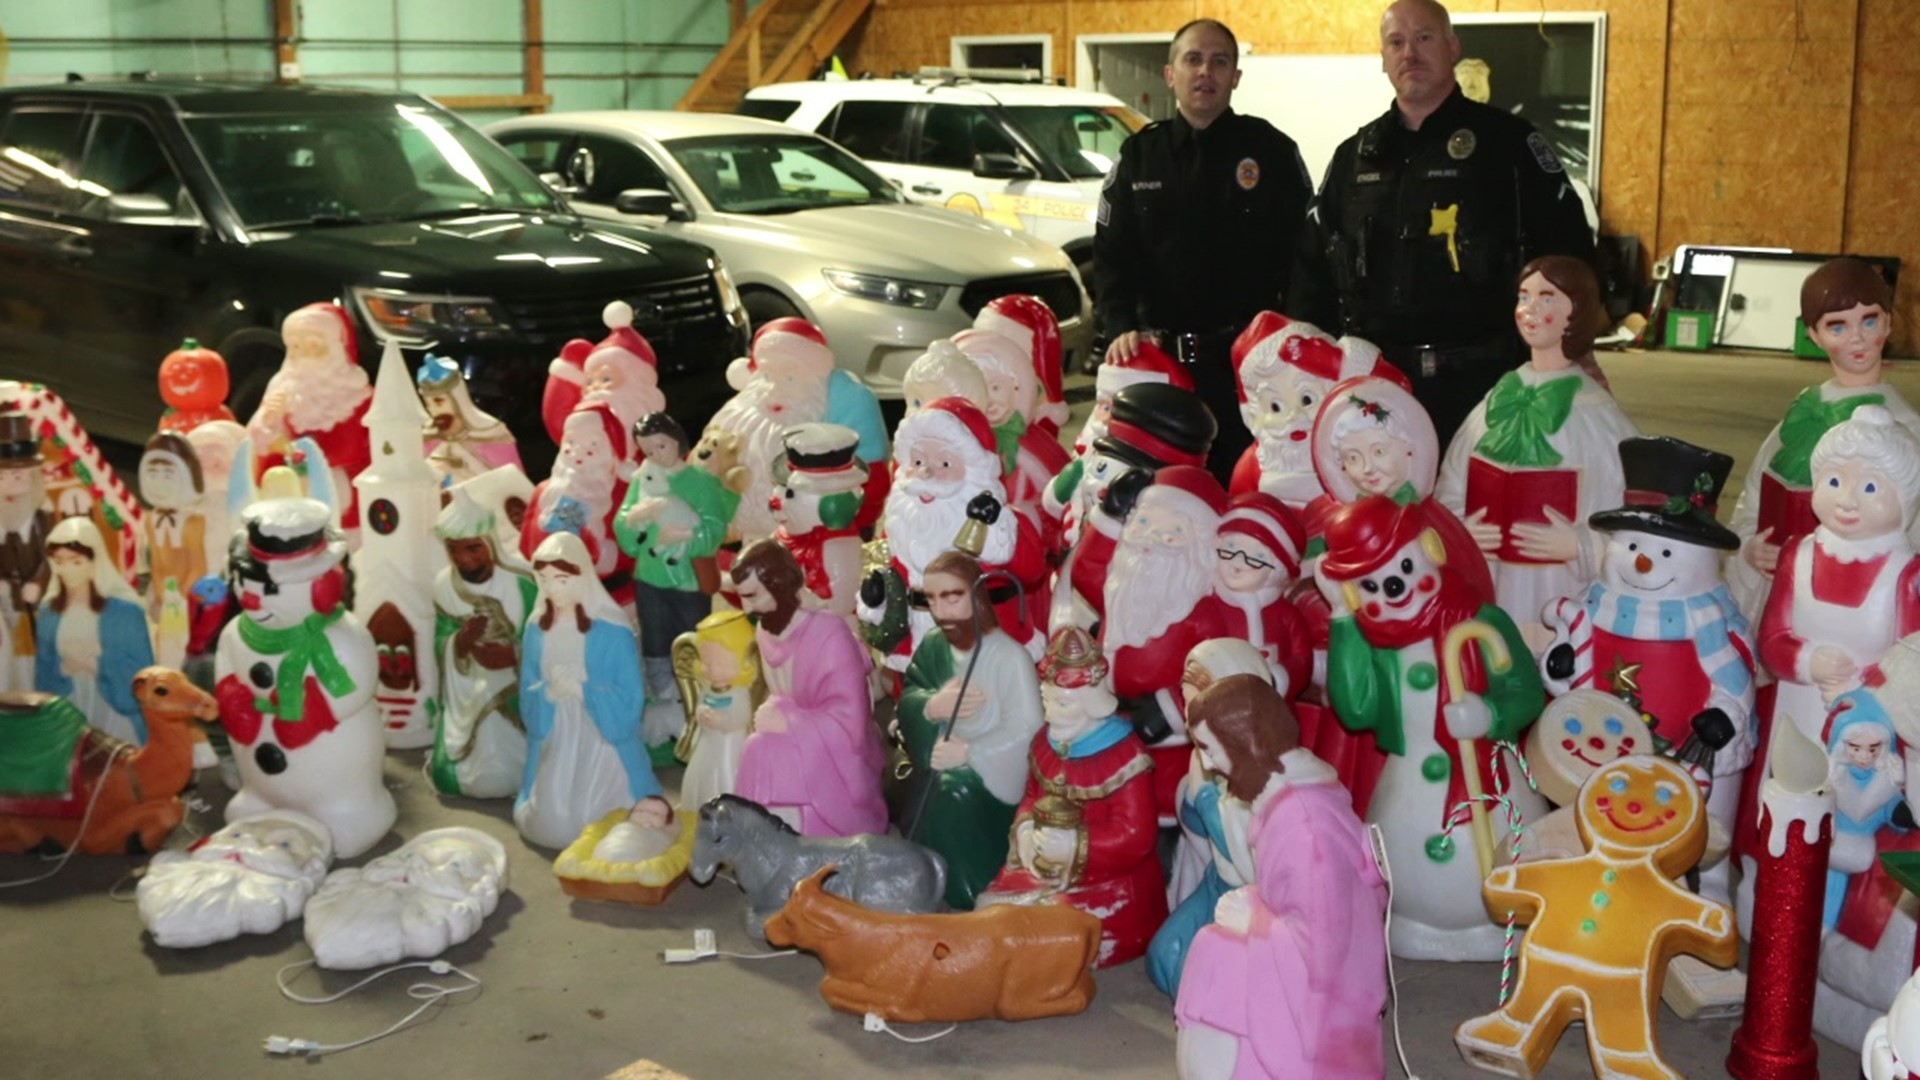 More than 60 stolen holiday decorations were recovered by police in Lycoming County.